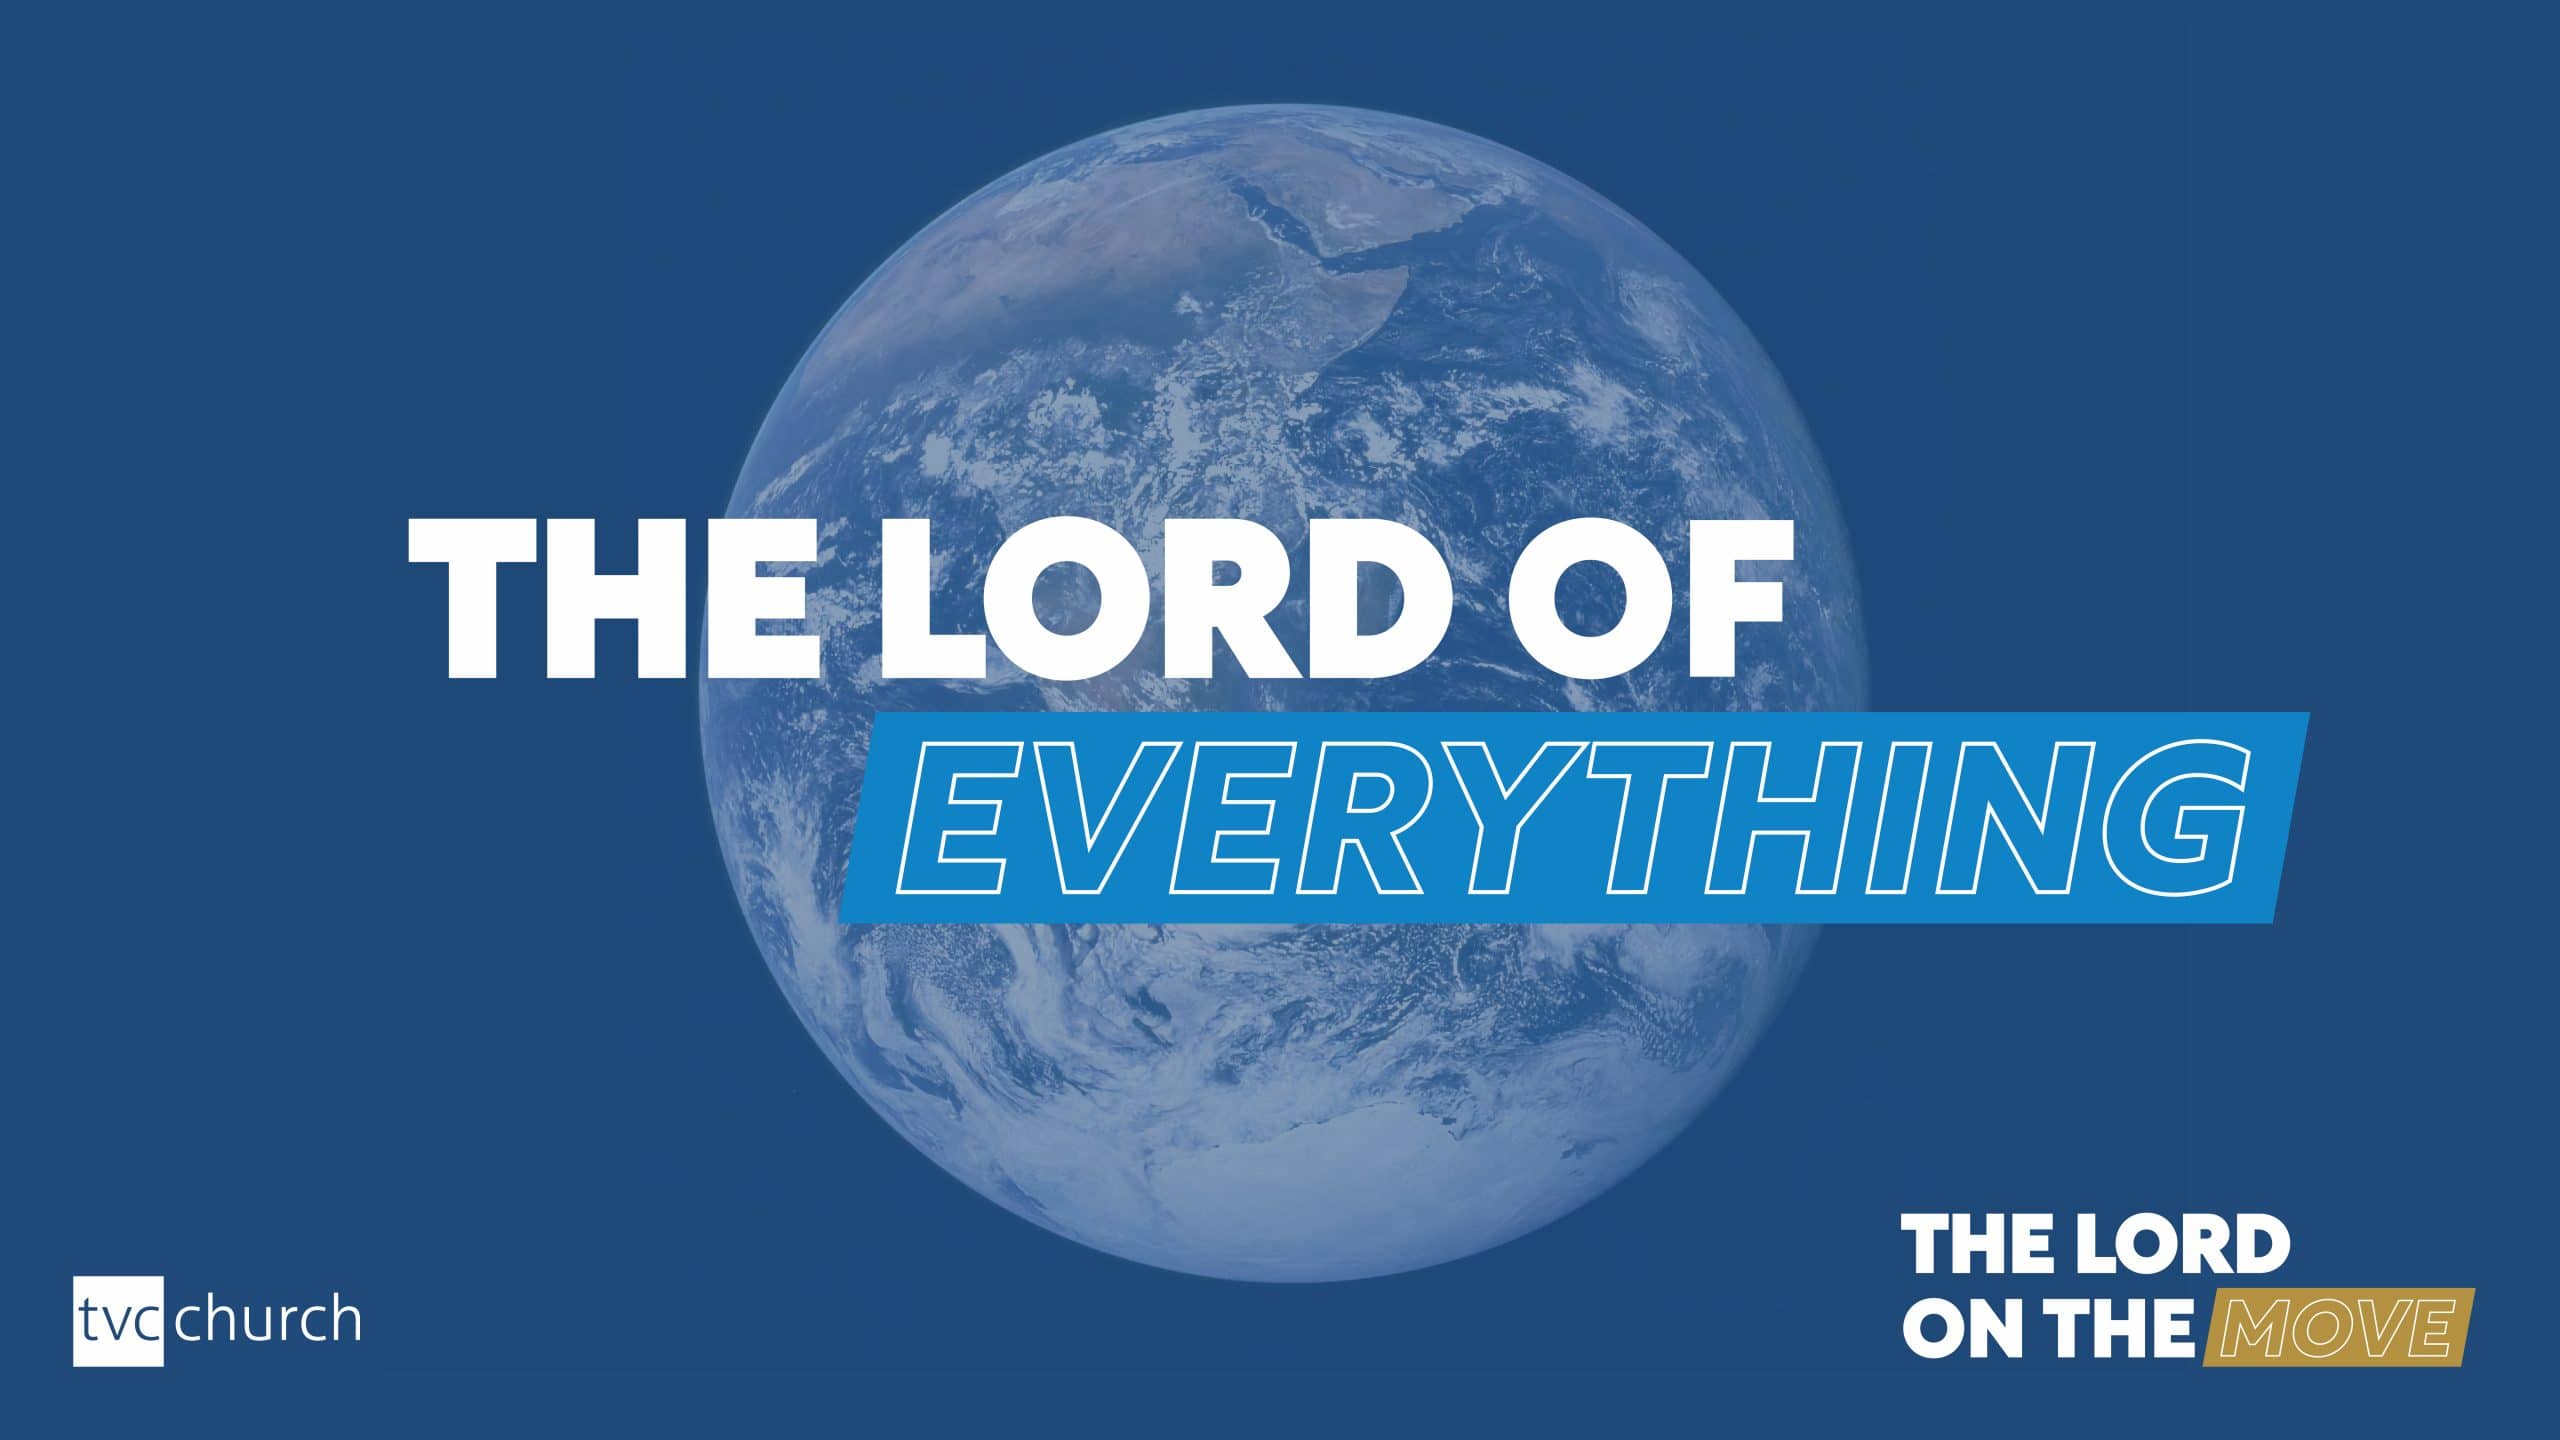 The Lord of Everything